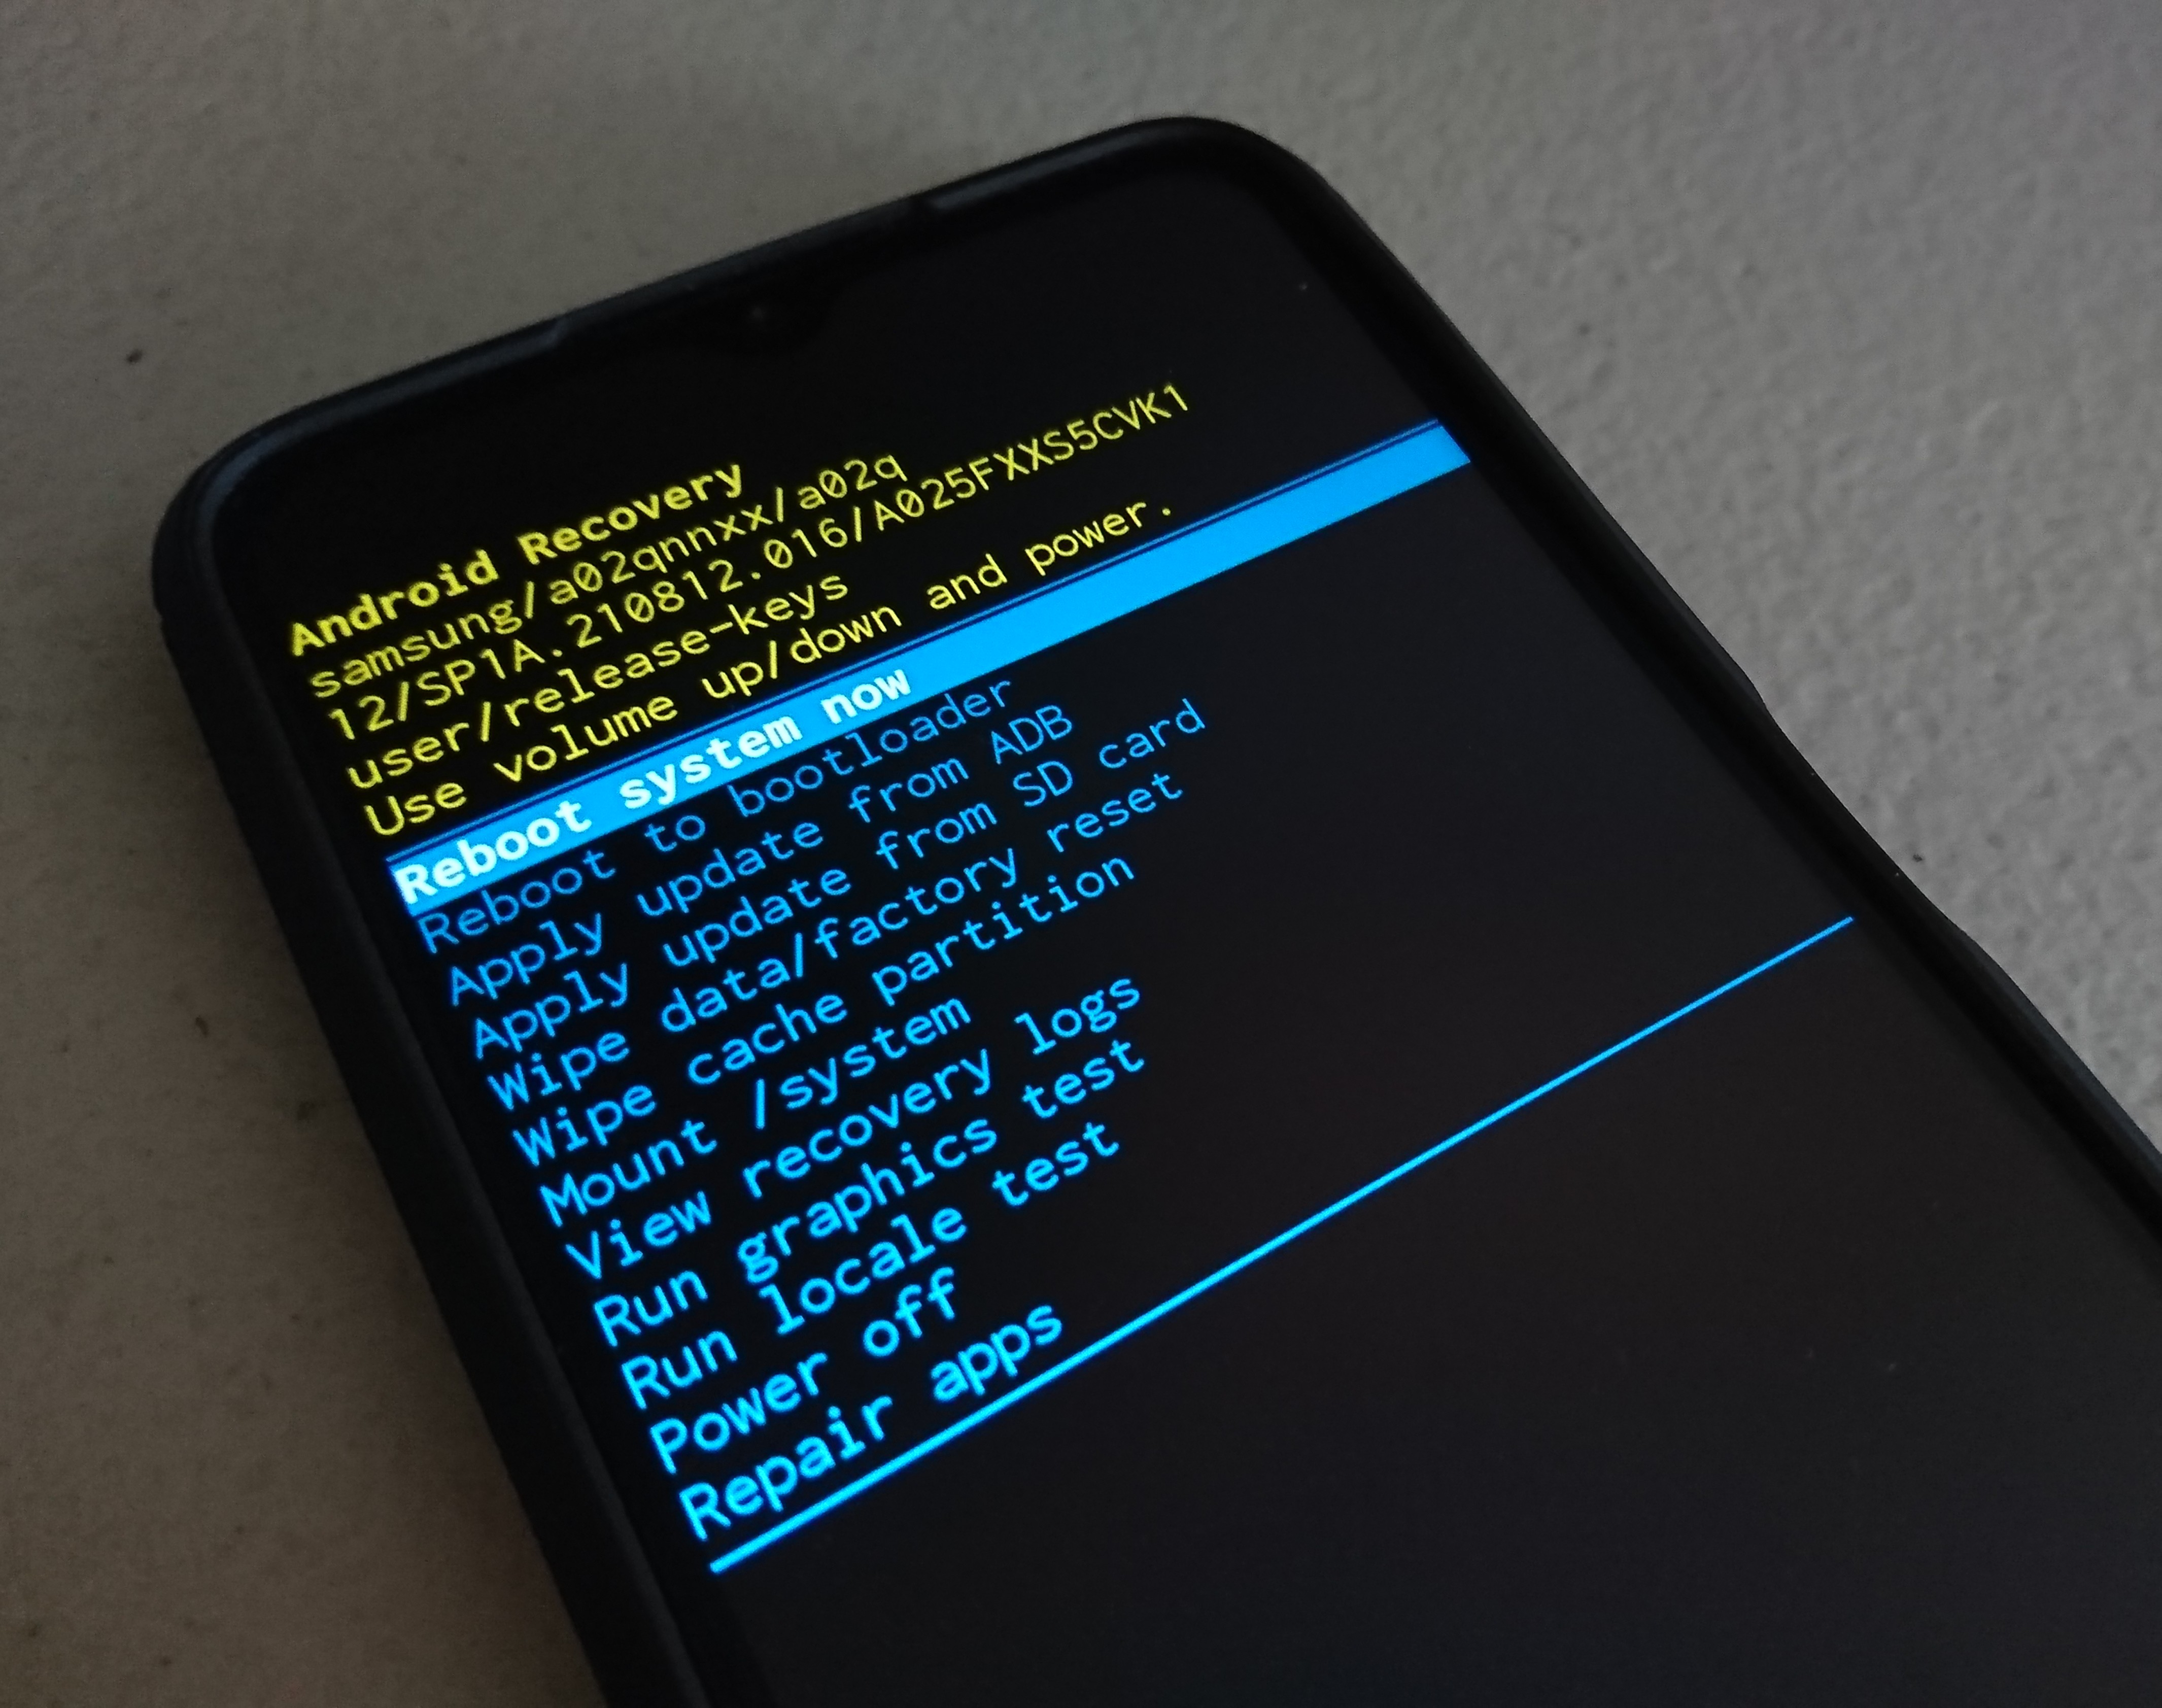 Android system recovery menu